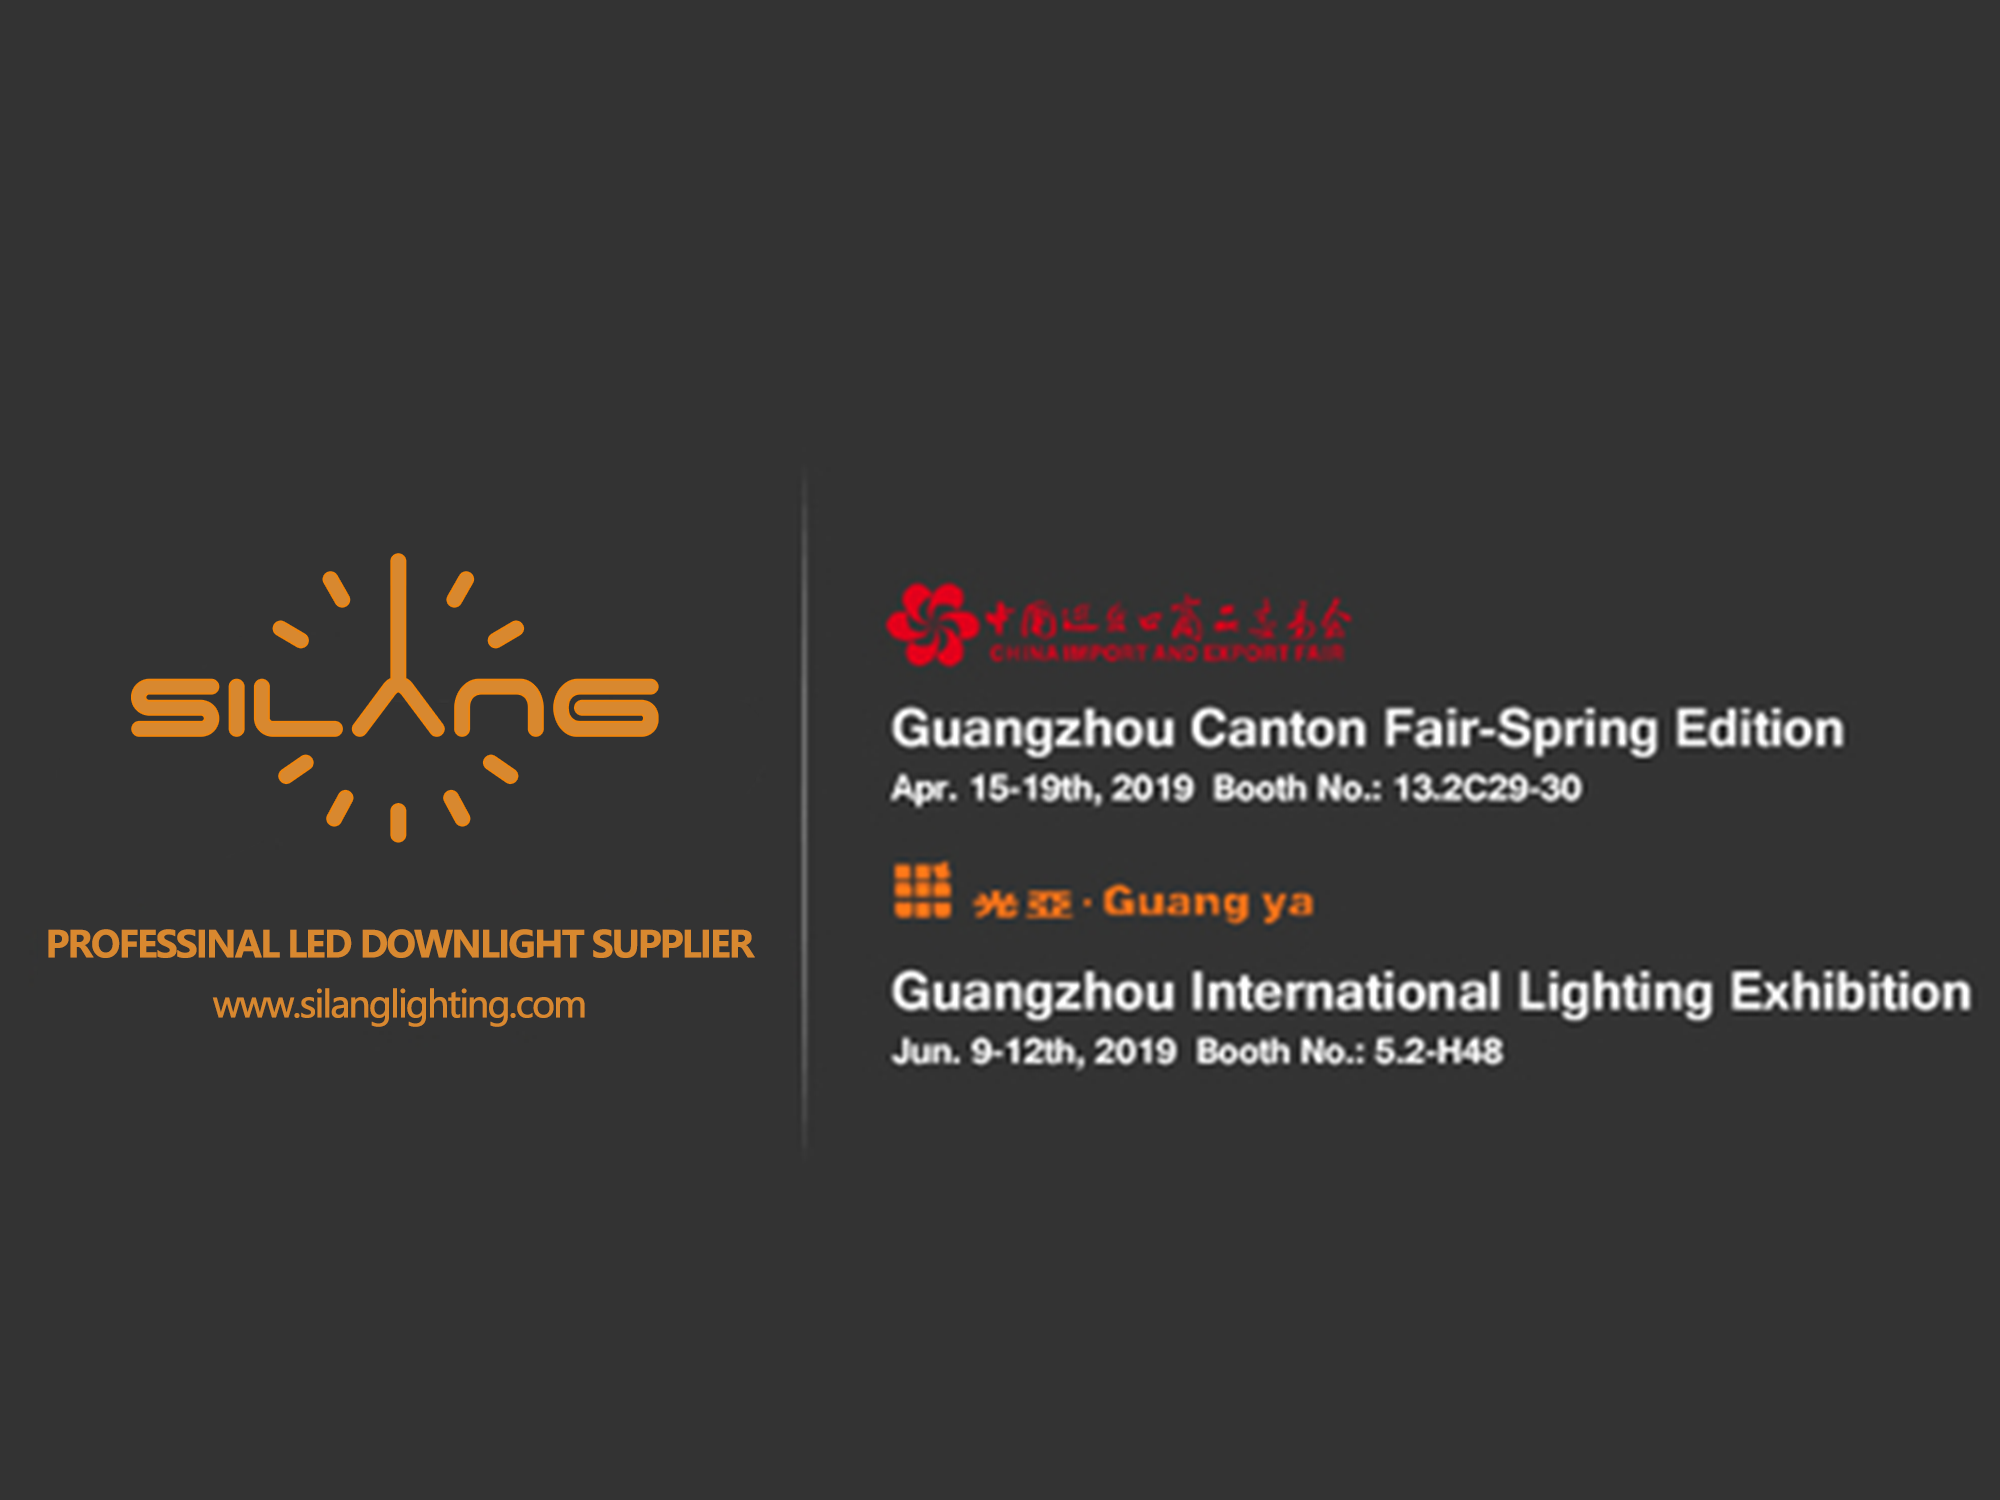 We Sincerely Invite You To Our Next Two Lighting Exhibitions